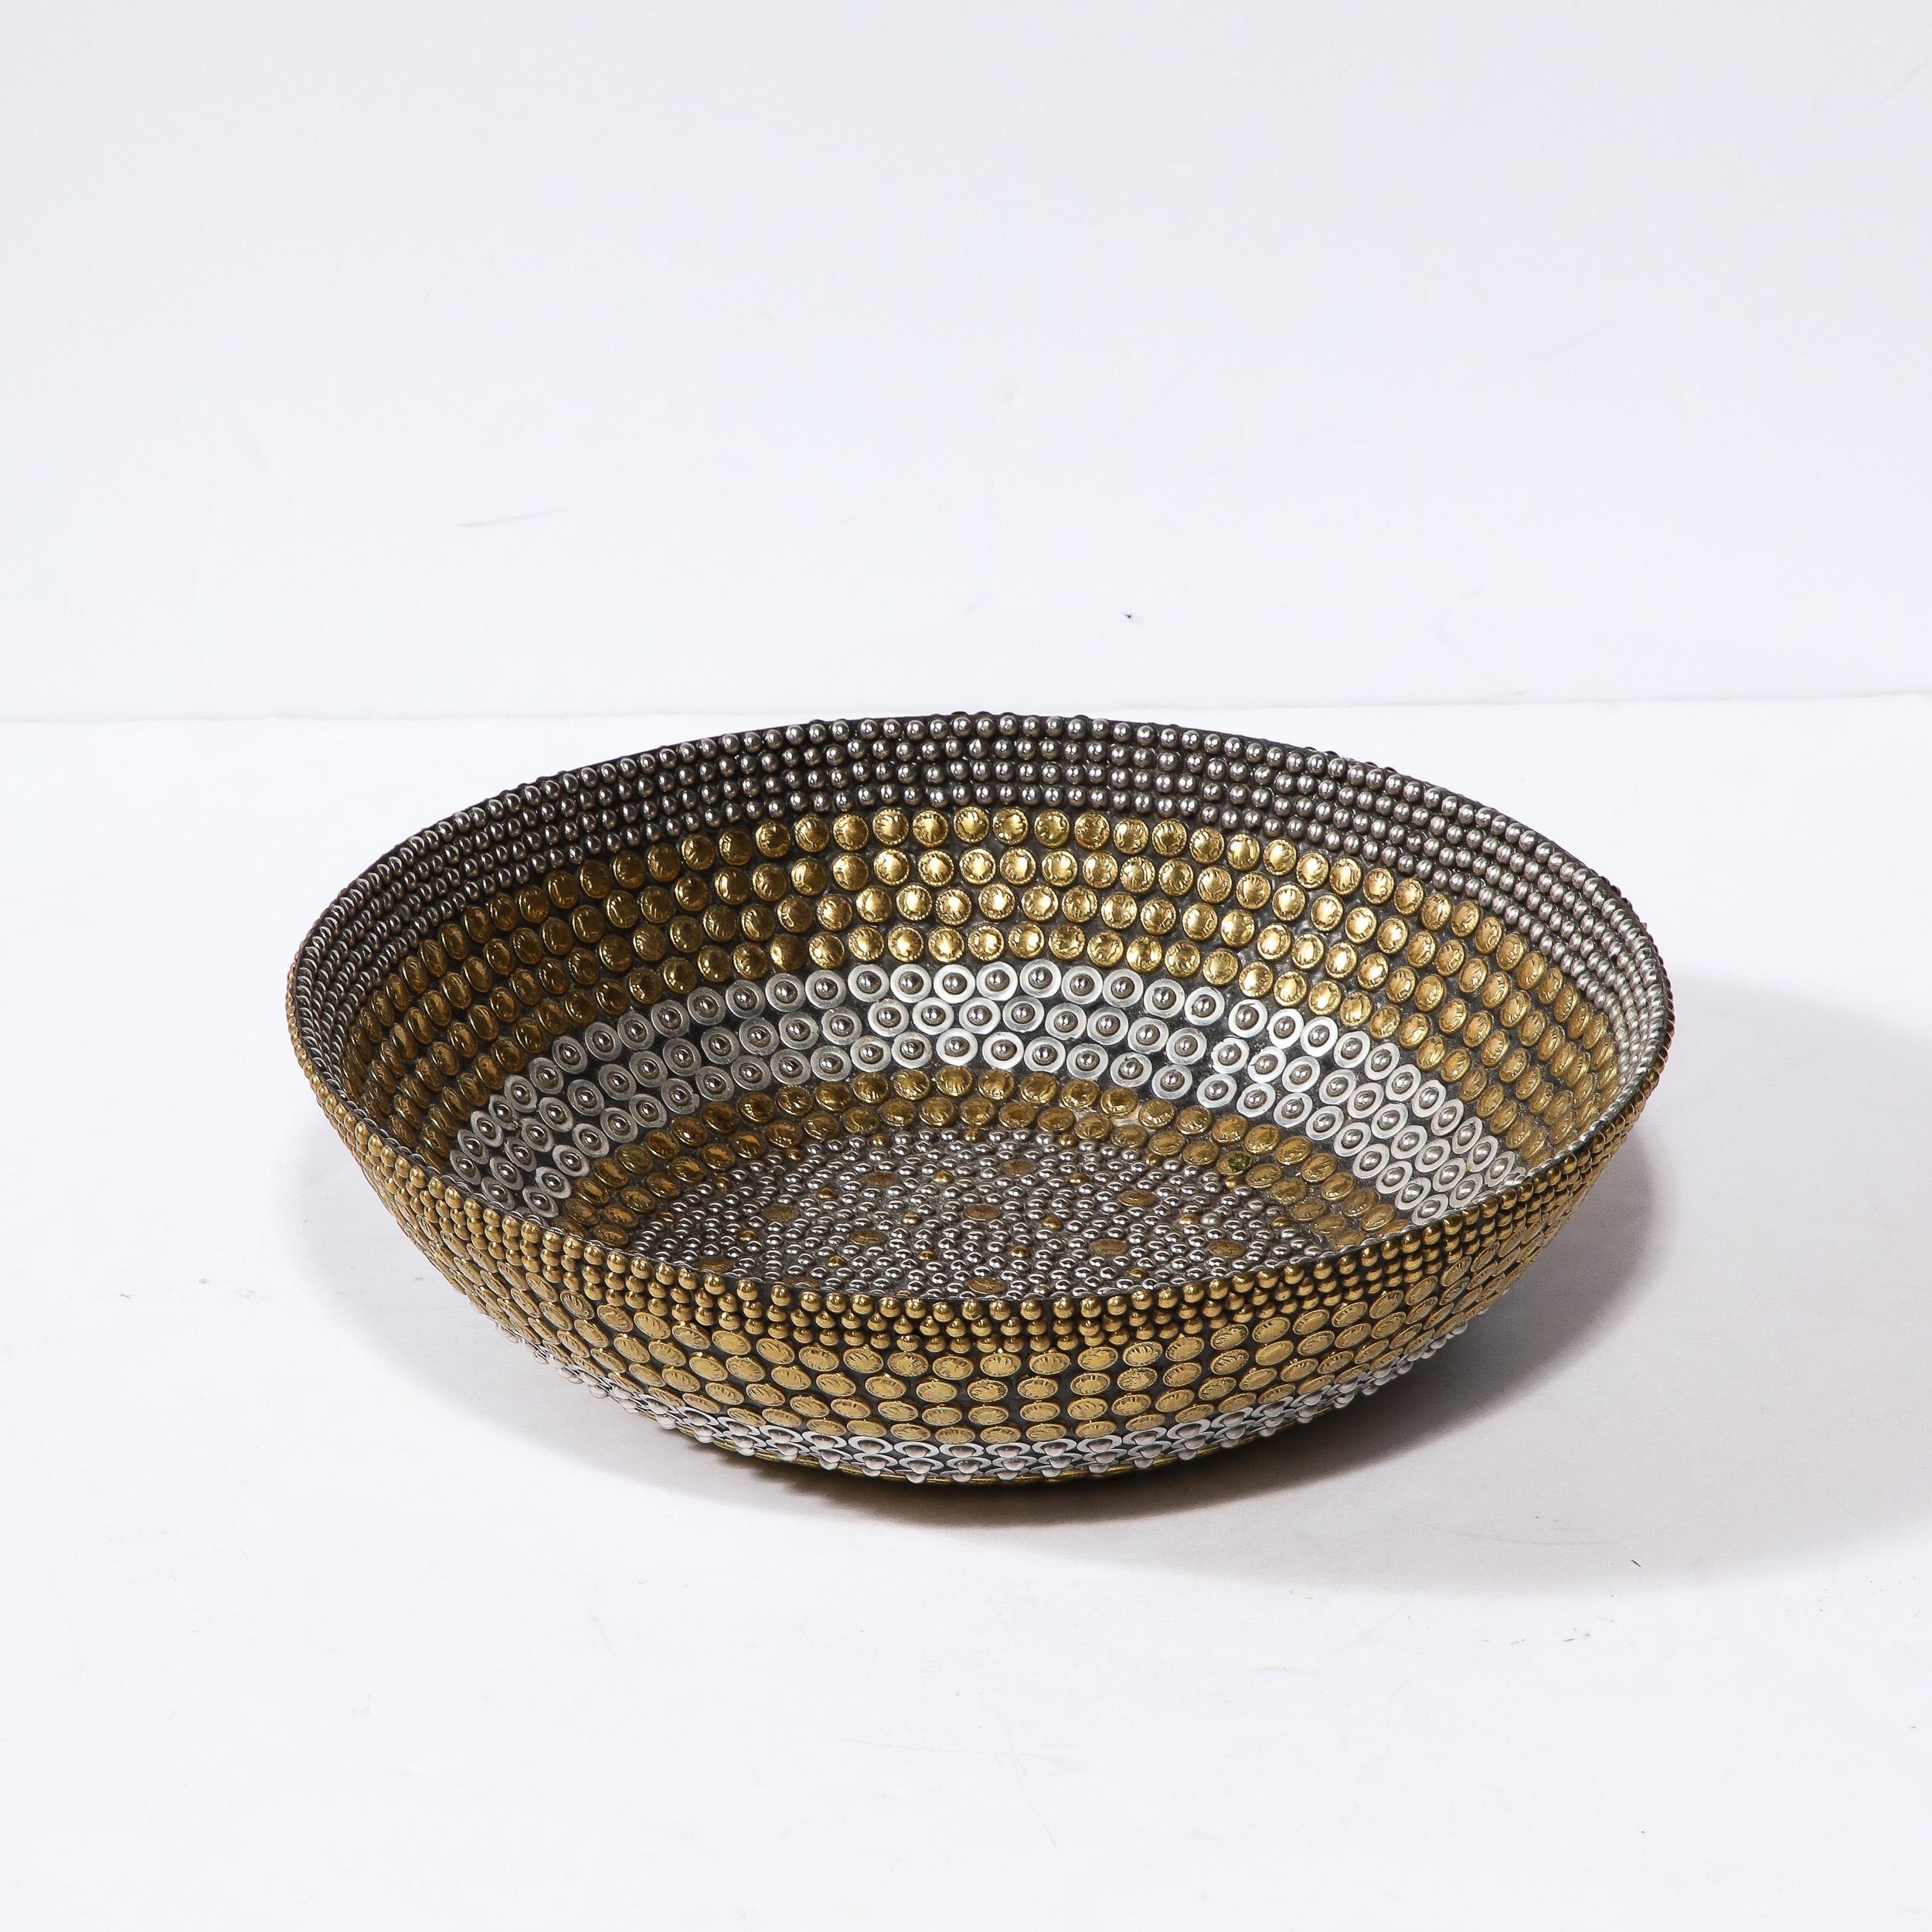 This refined and sophisticated modernist center piece bowl was realized by the esteemed designer Kim Seybert in the Philippines during the latter half of the 20th century. The exterior of the piece is laden with an abundance of brass and nickel